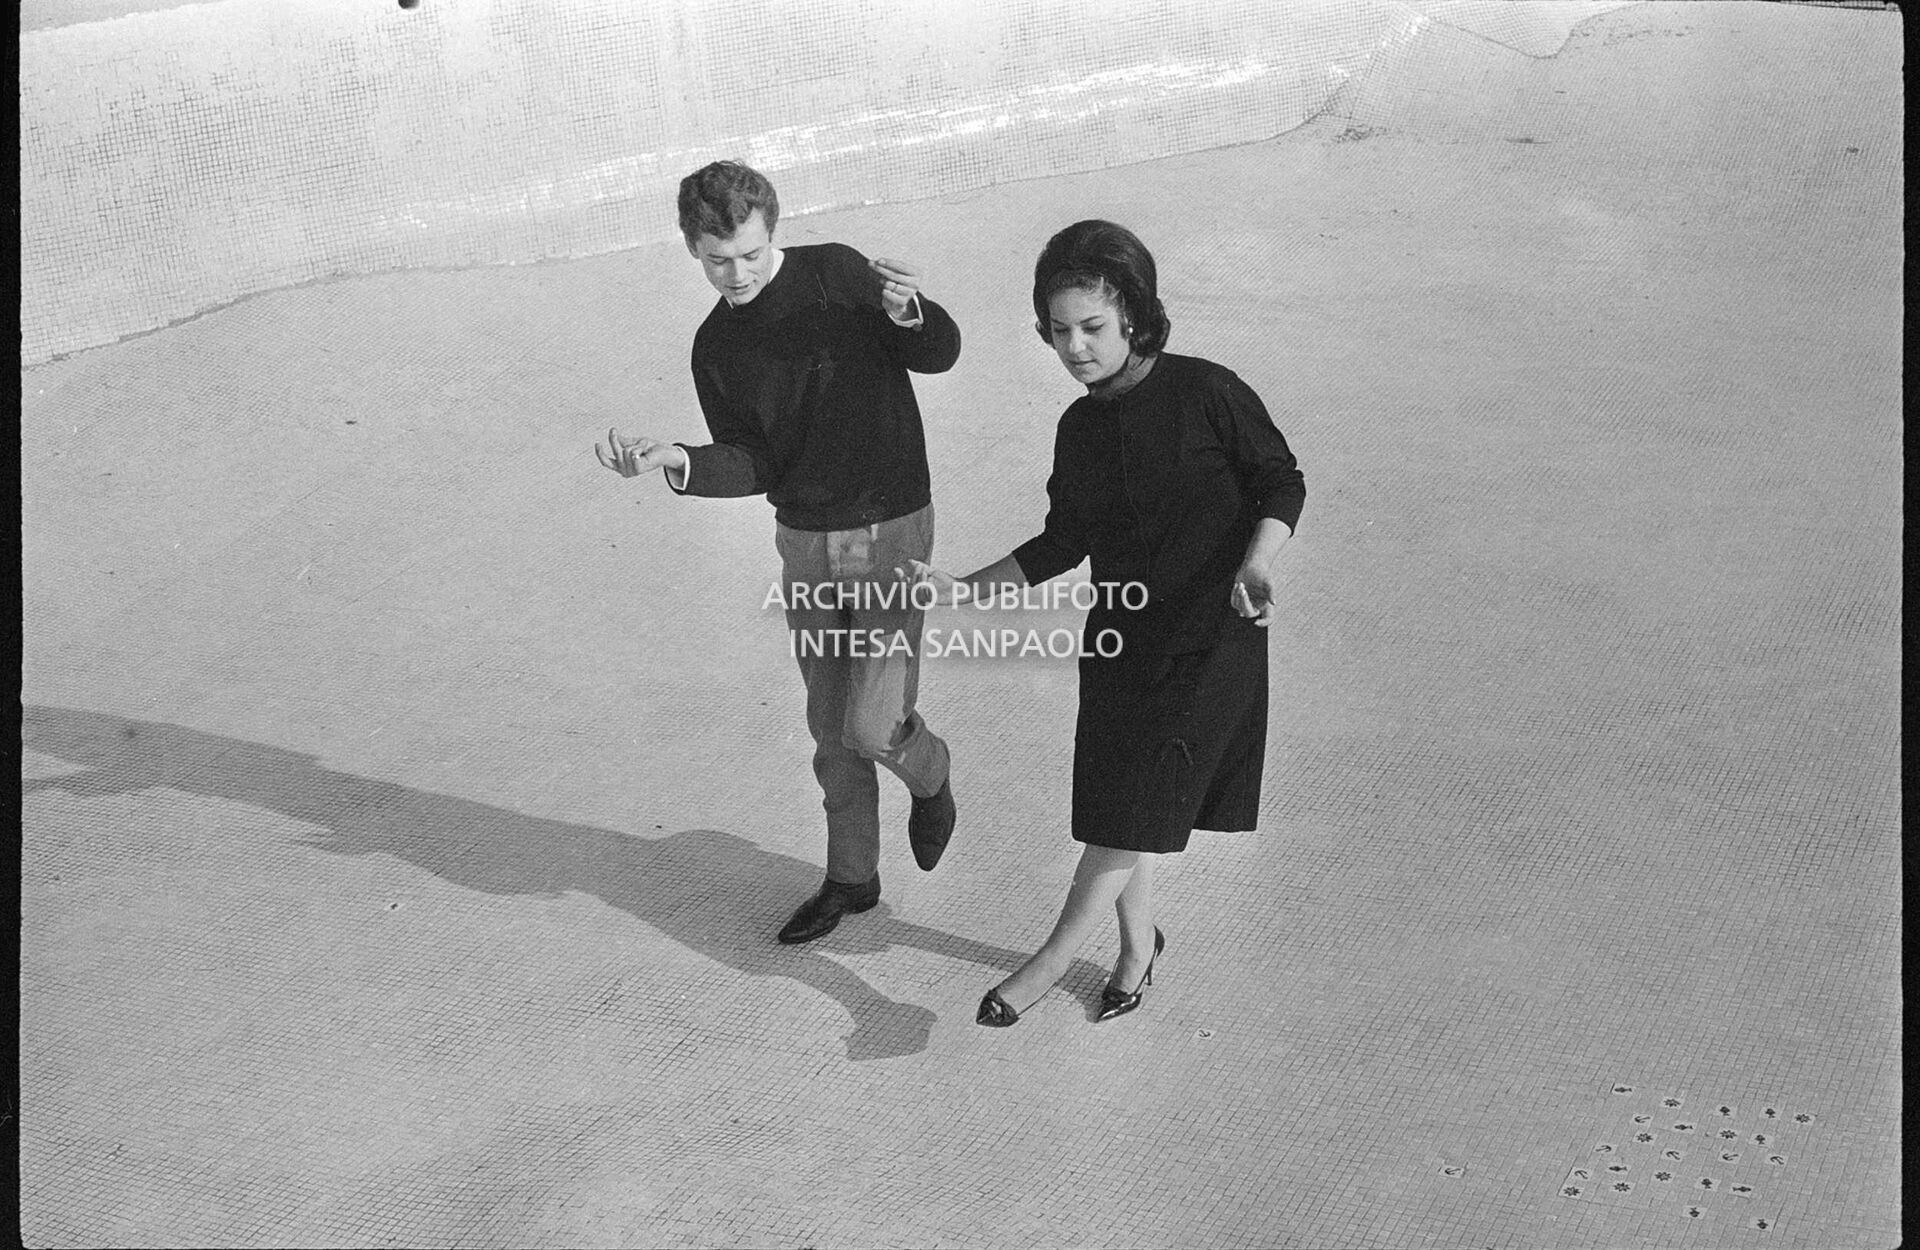 Richard Moser Jr. and Frida Boccara, youngsters making their debut, dance during a break at the 14th Sanremo Festival